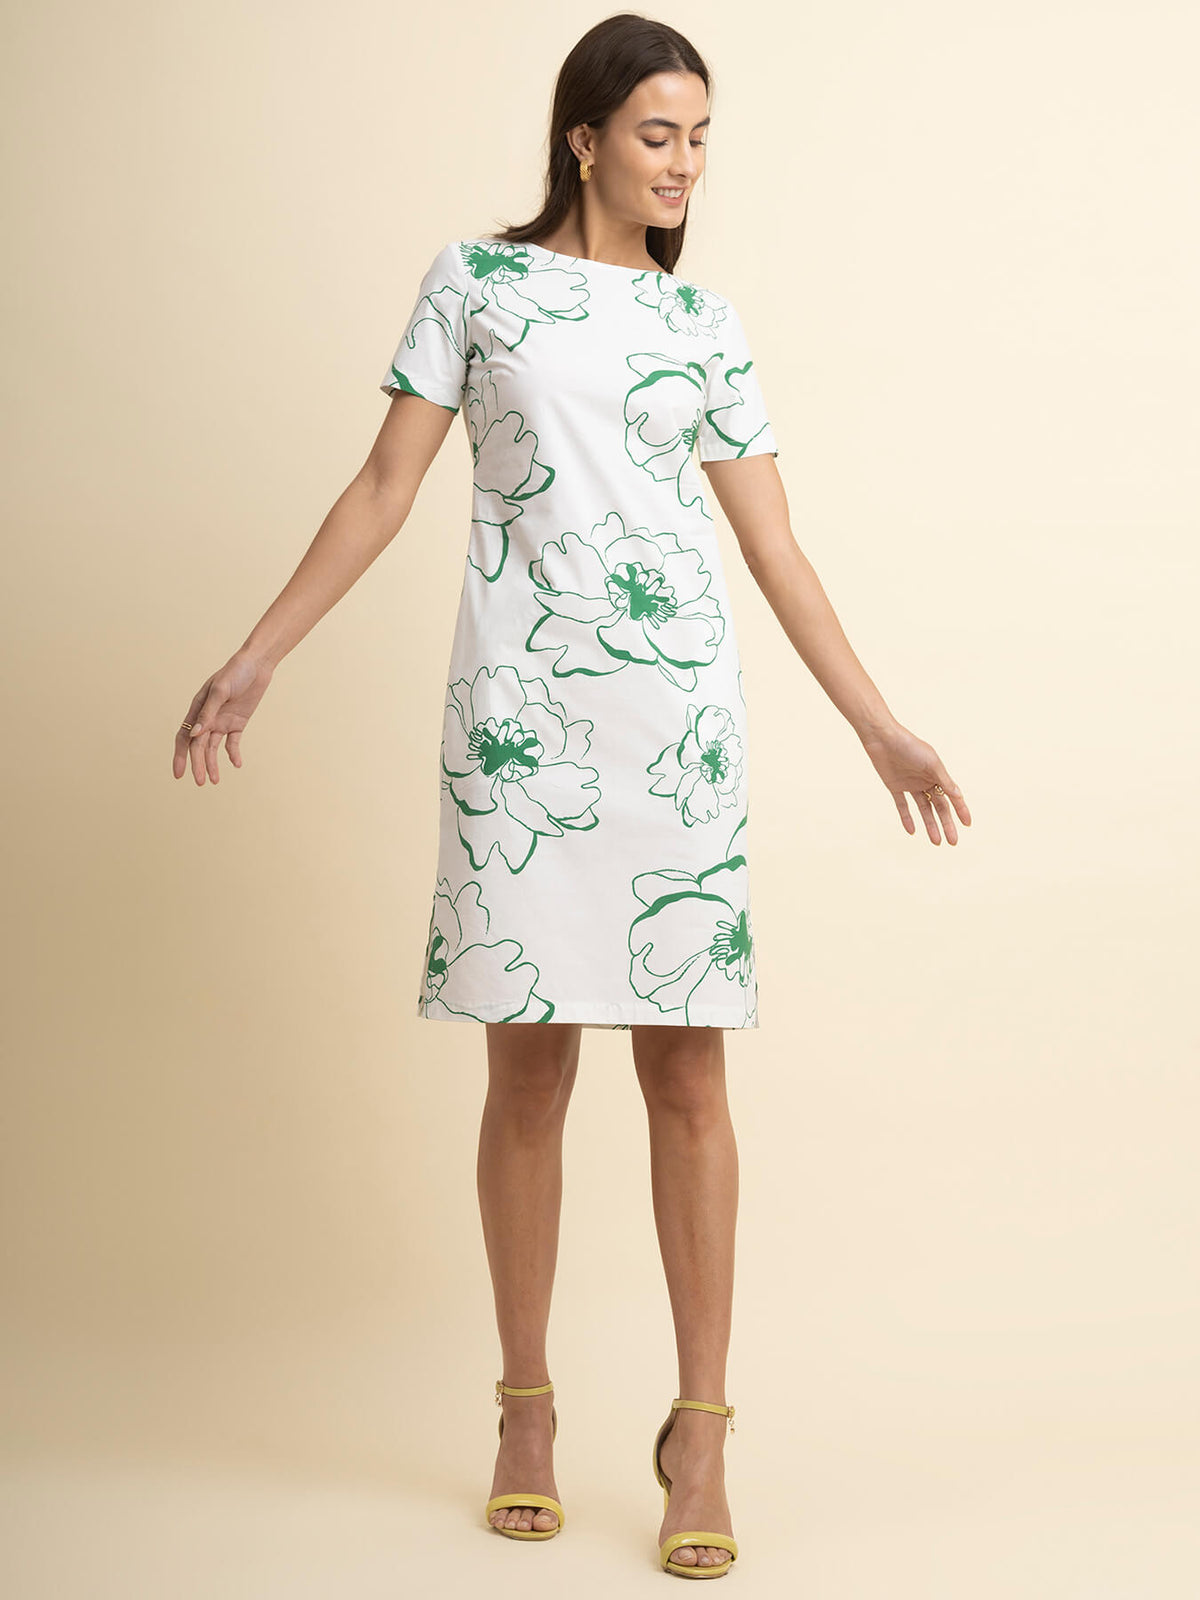 Cotton Boat Neck Dress - White And Green